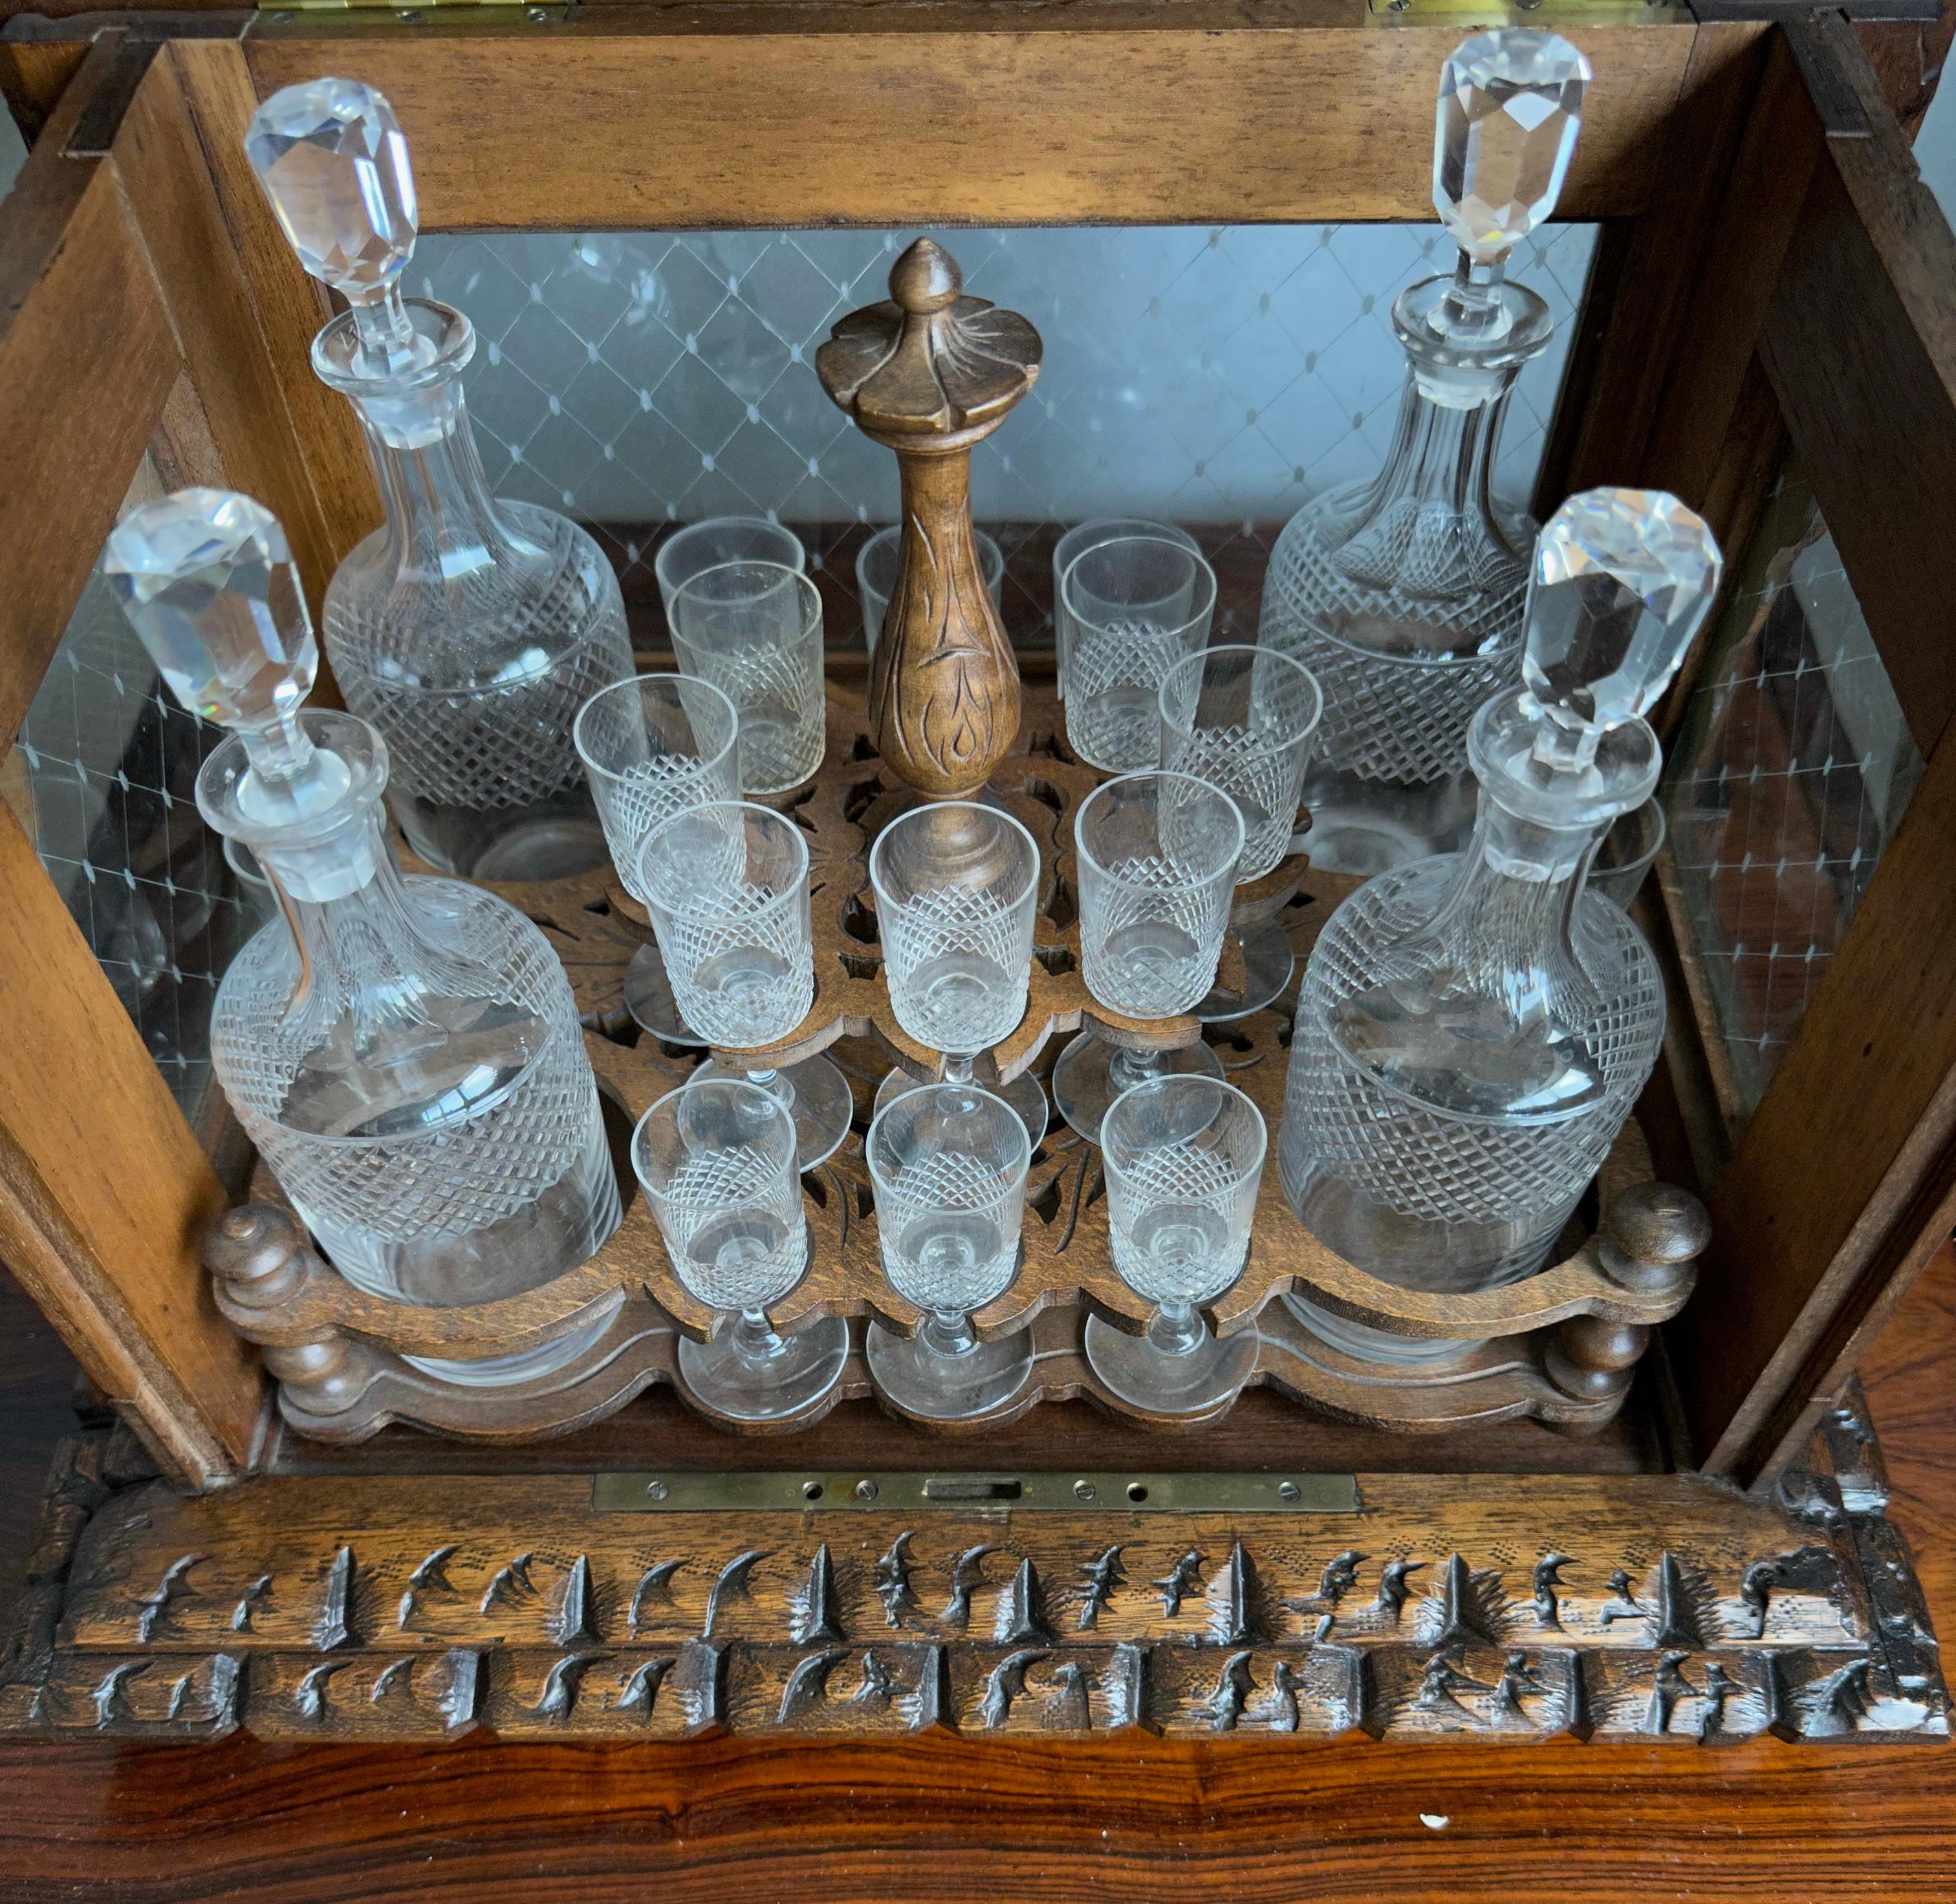 19th Century Victorian Era Black Forest Liquor Tantalus with Glasses & Decanters For Sale 4